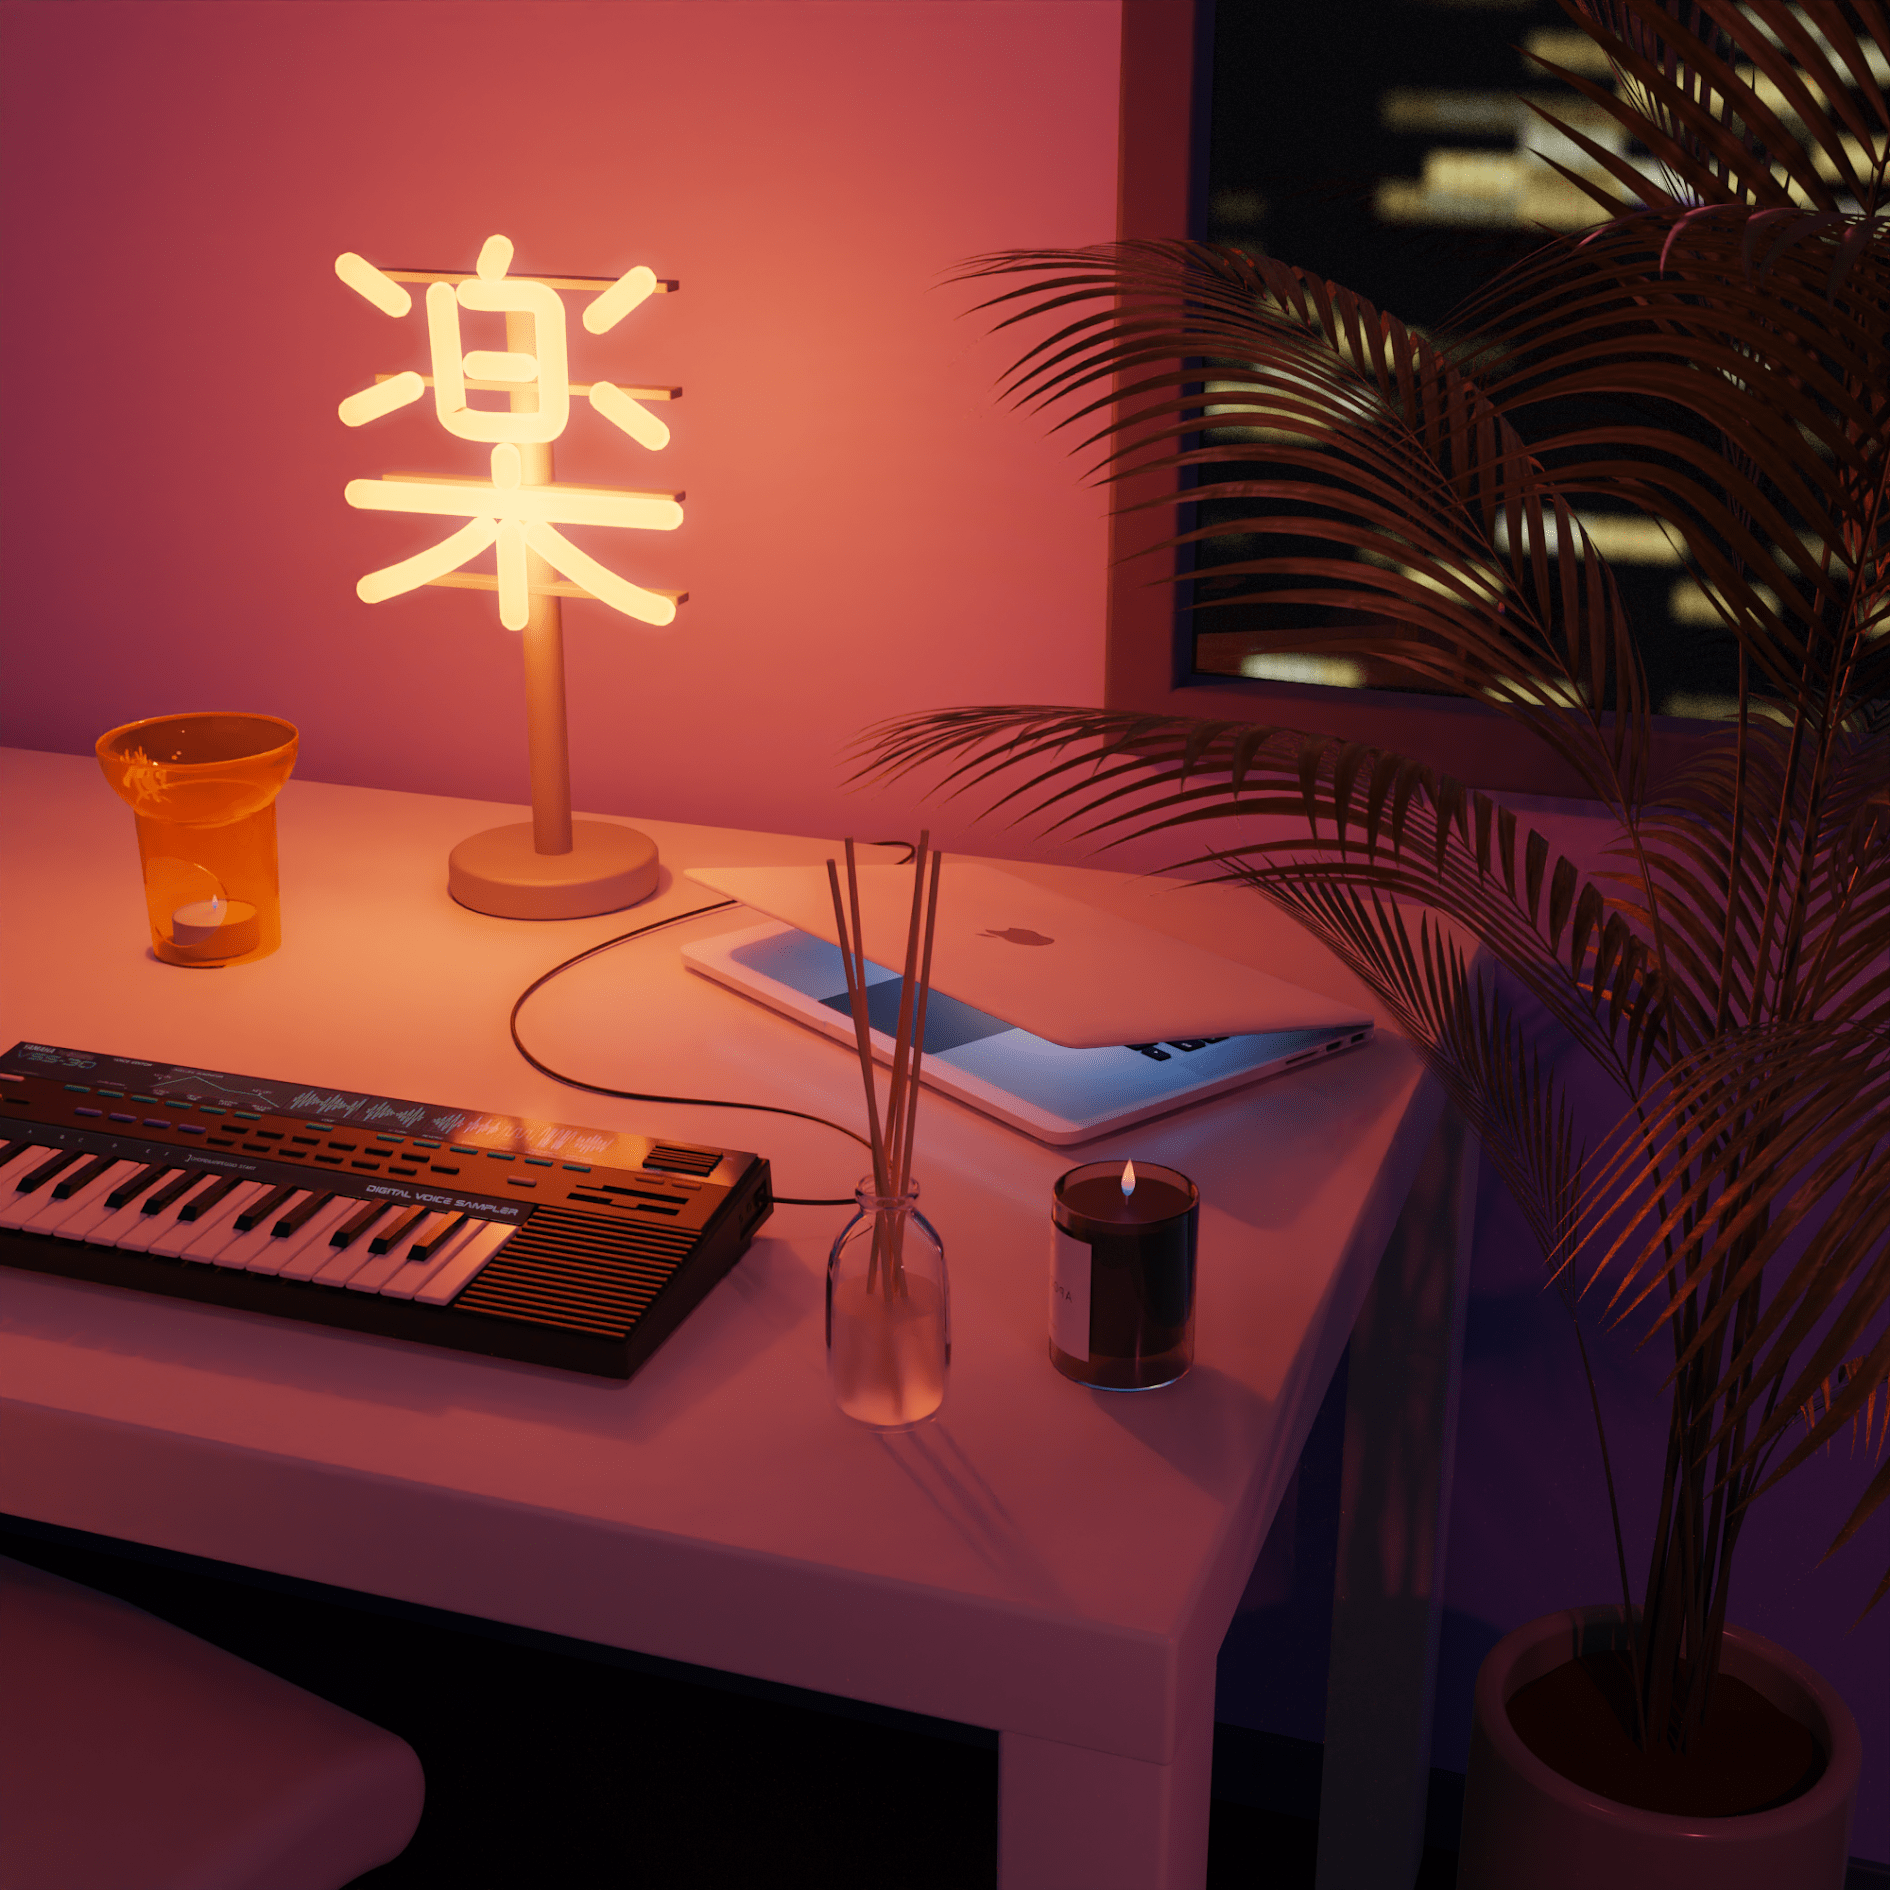 A neon sign featuring the Japanese character for "comfort" illuminates a desk containing a music keyboard and a half-closed MacBook. A small glass lantern holds an unlit candle. An oil diffuser is beside a dimly-lit large candle, and large palm fronds encompass the desk, drooping over to slightly obscure a cityscape seen through a window.